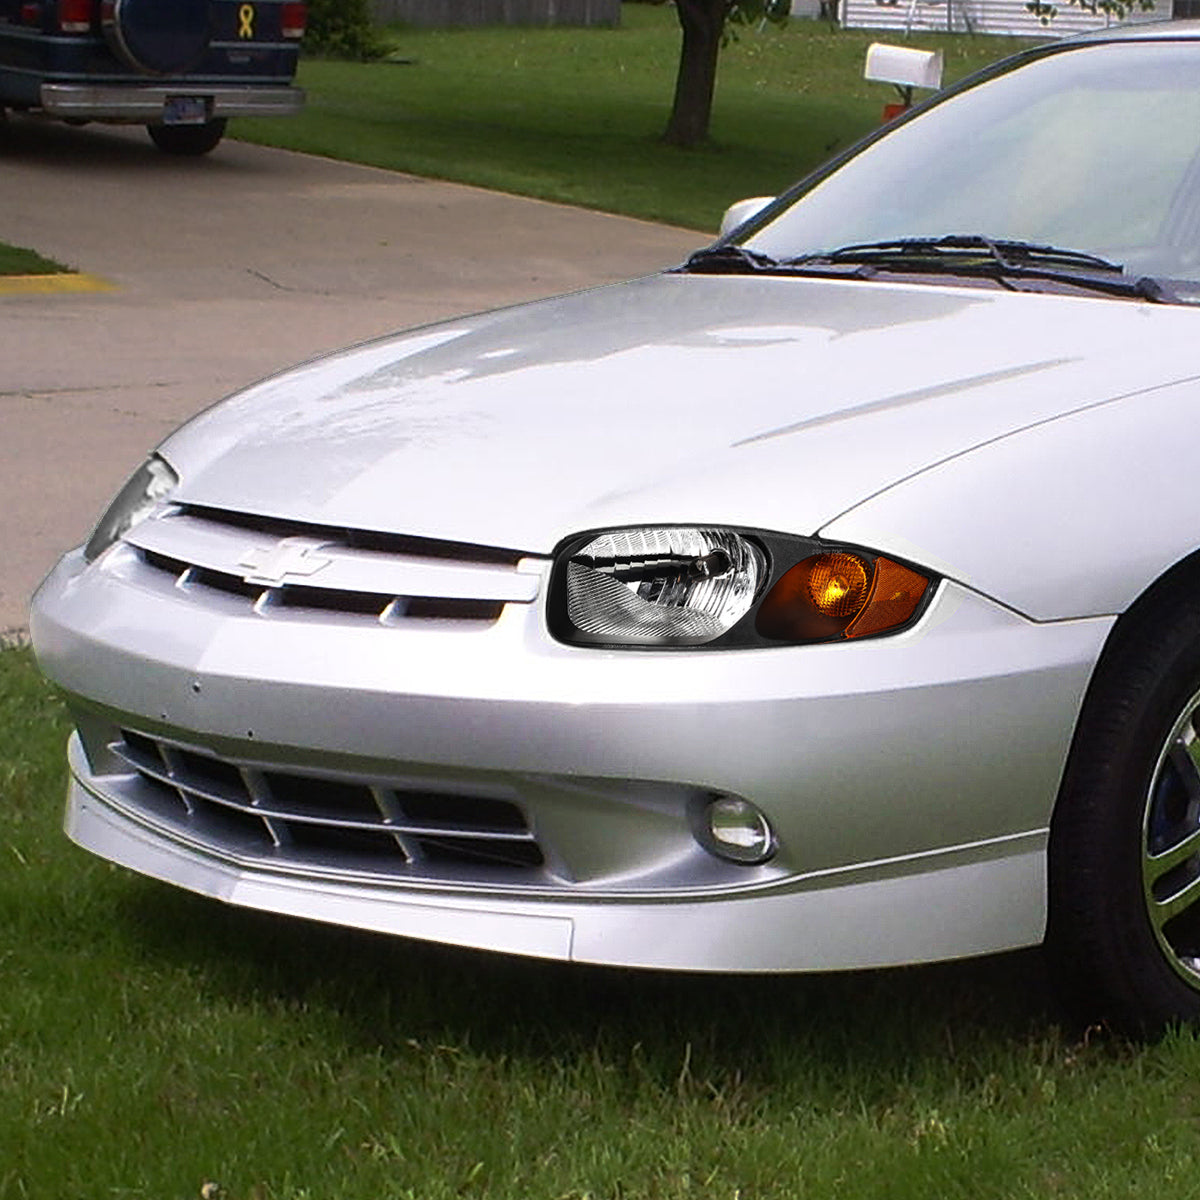 Factory Style Headlights<br>03-05 Chevy Cavalier